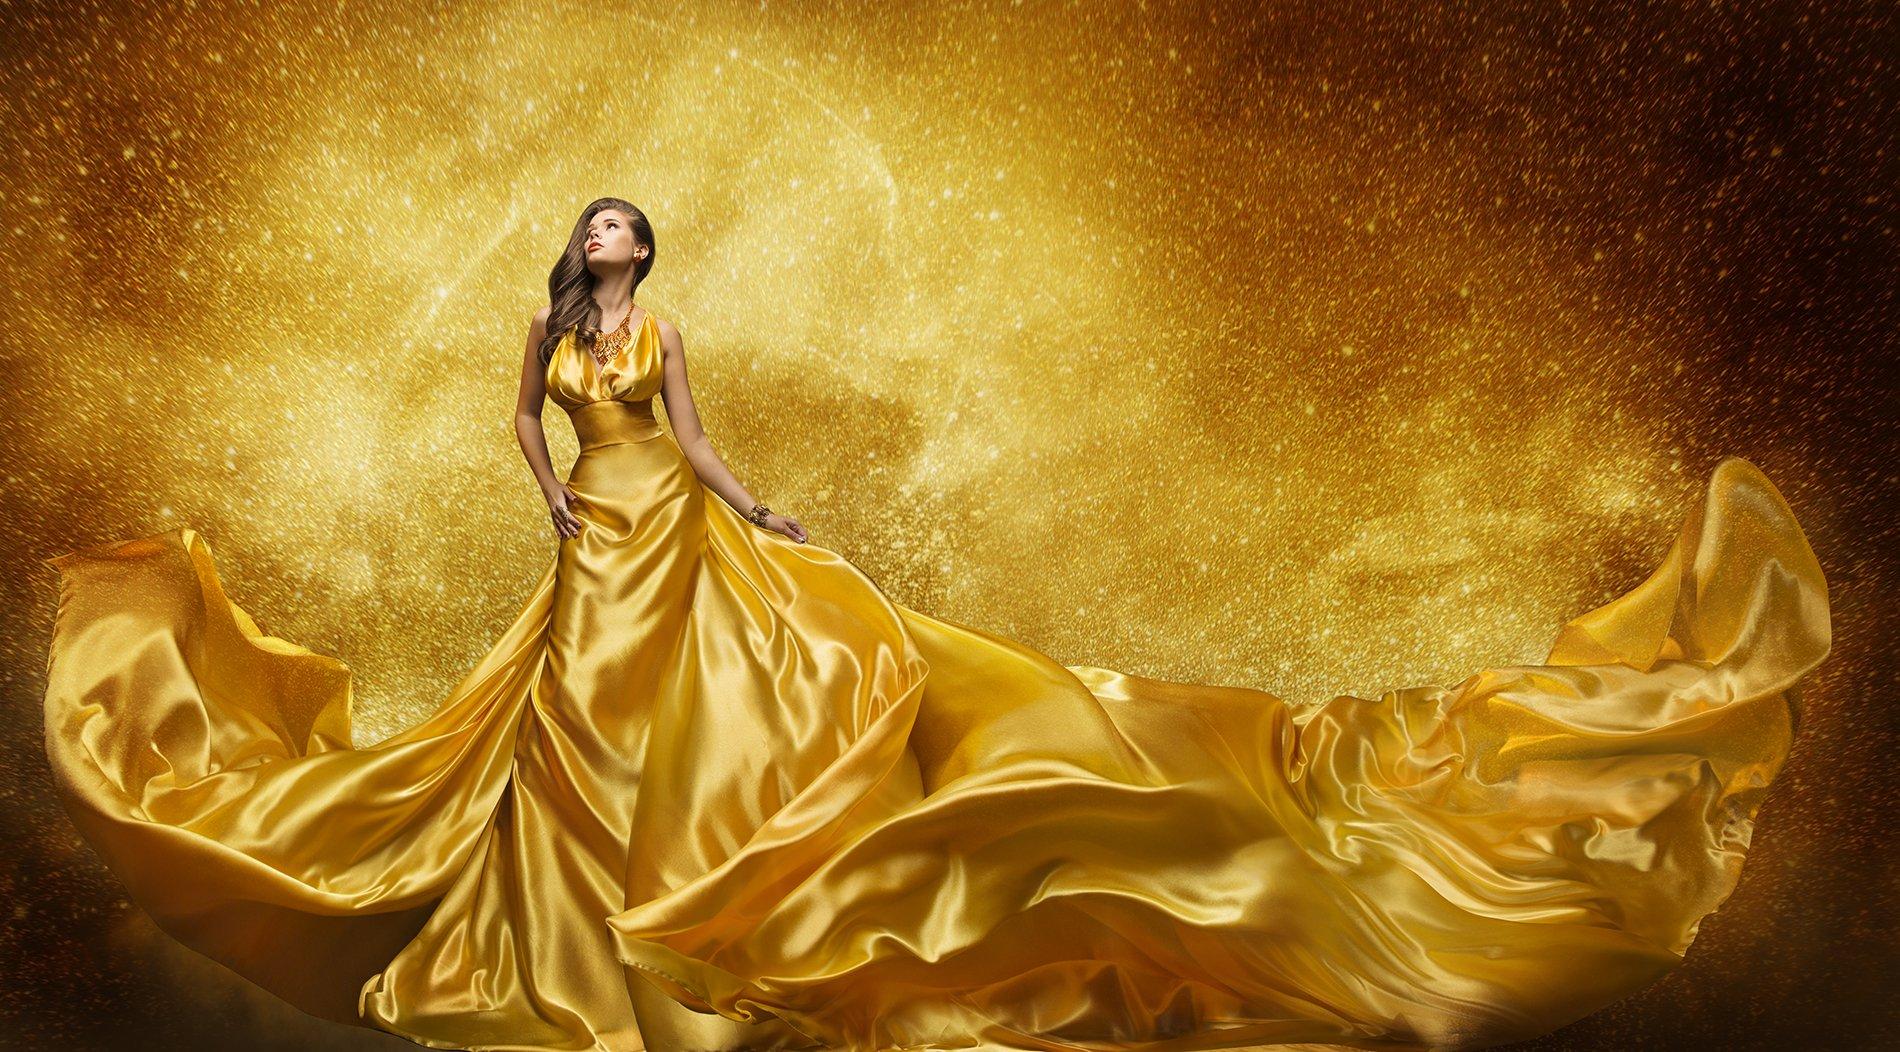 Girl with the Golden Dress Wallpaper and Background Imagex1052